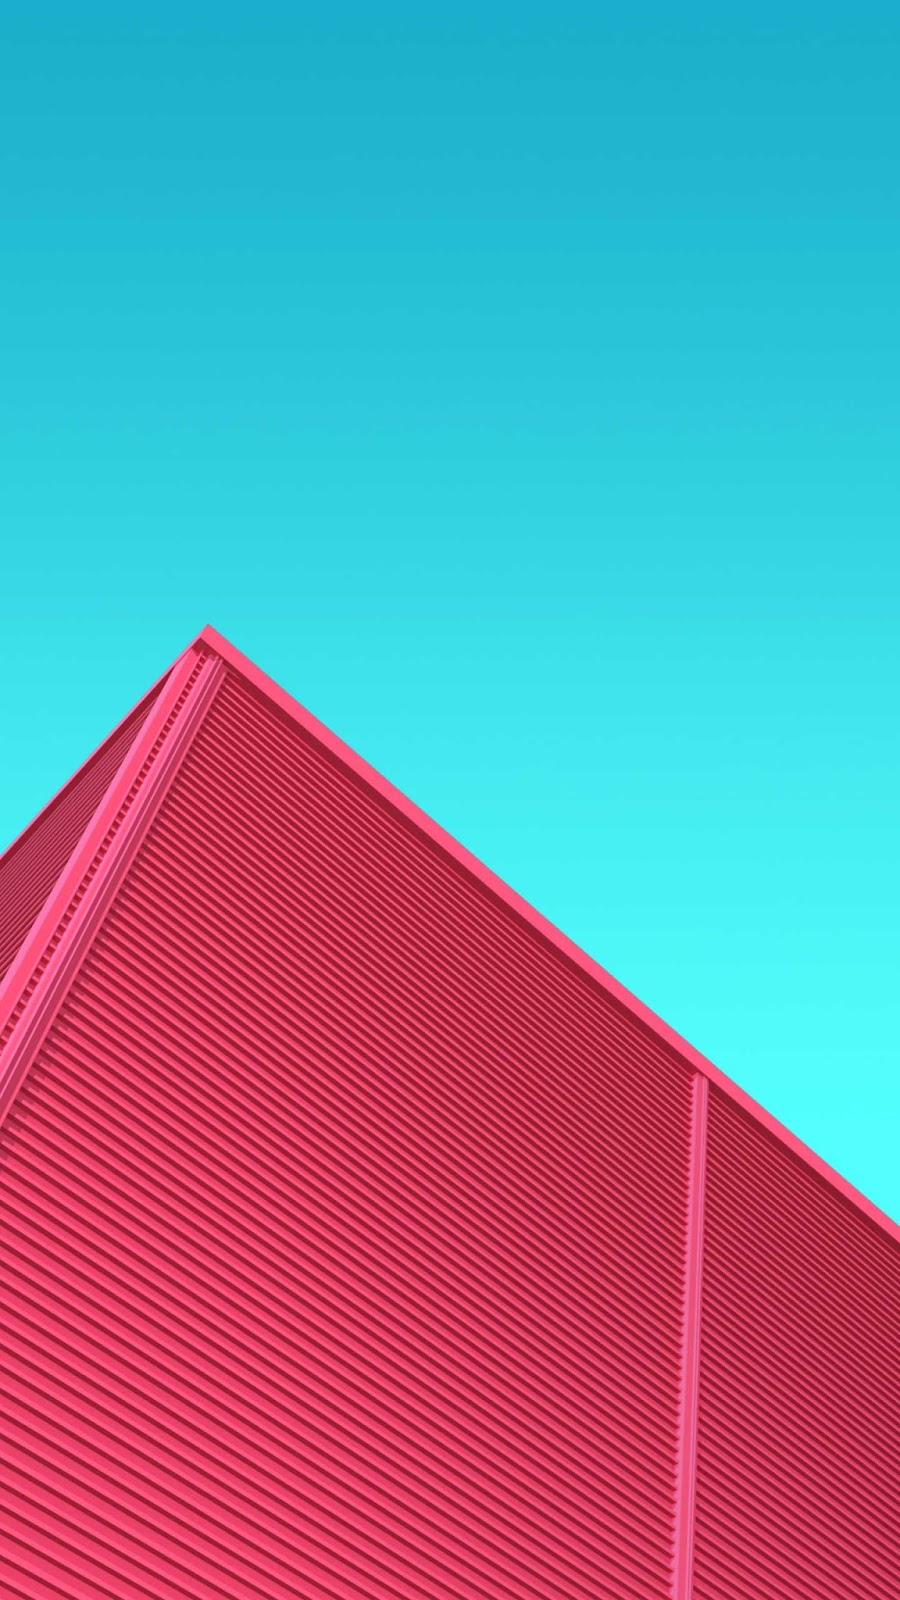 LG G4 wallpapers2